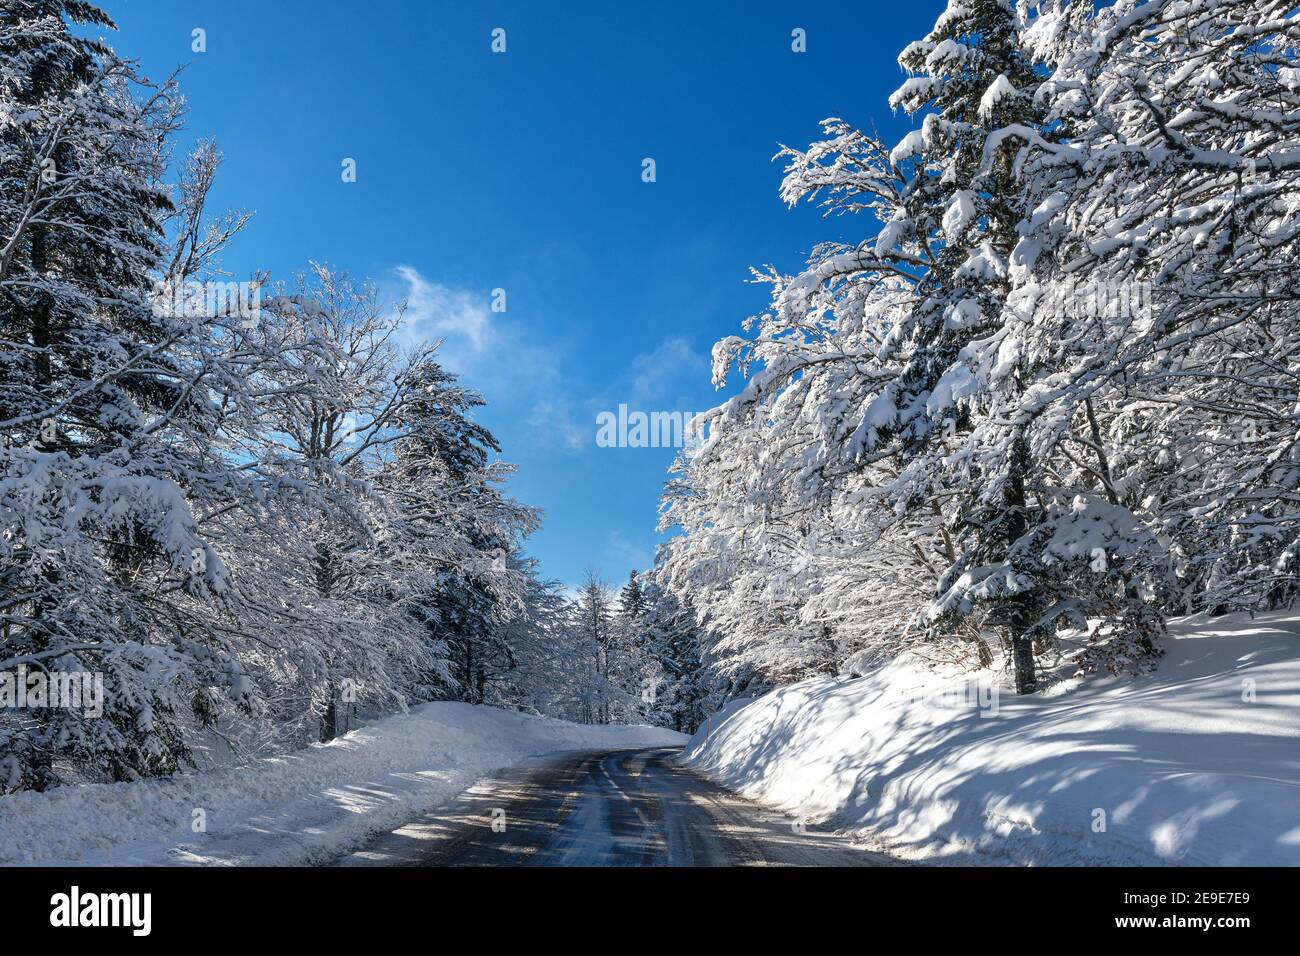 French winter landscapes. Snowy and icy mountain road. Vercors Regional Natural Park. Stock Photo